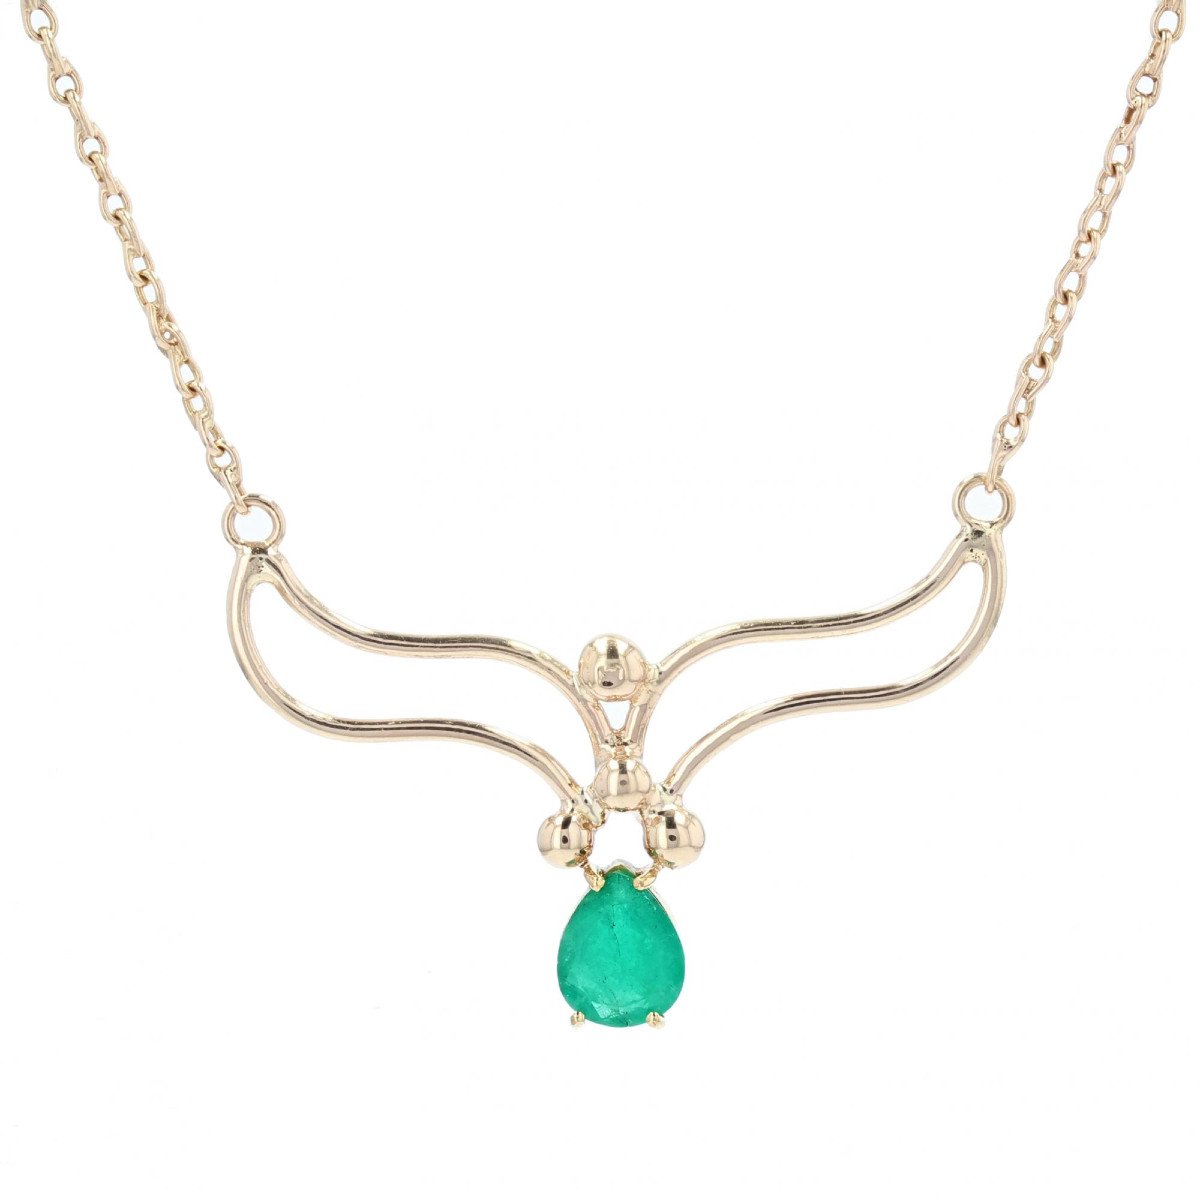 Gold Necklace And Its Emerald